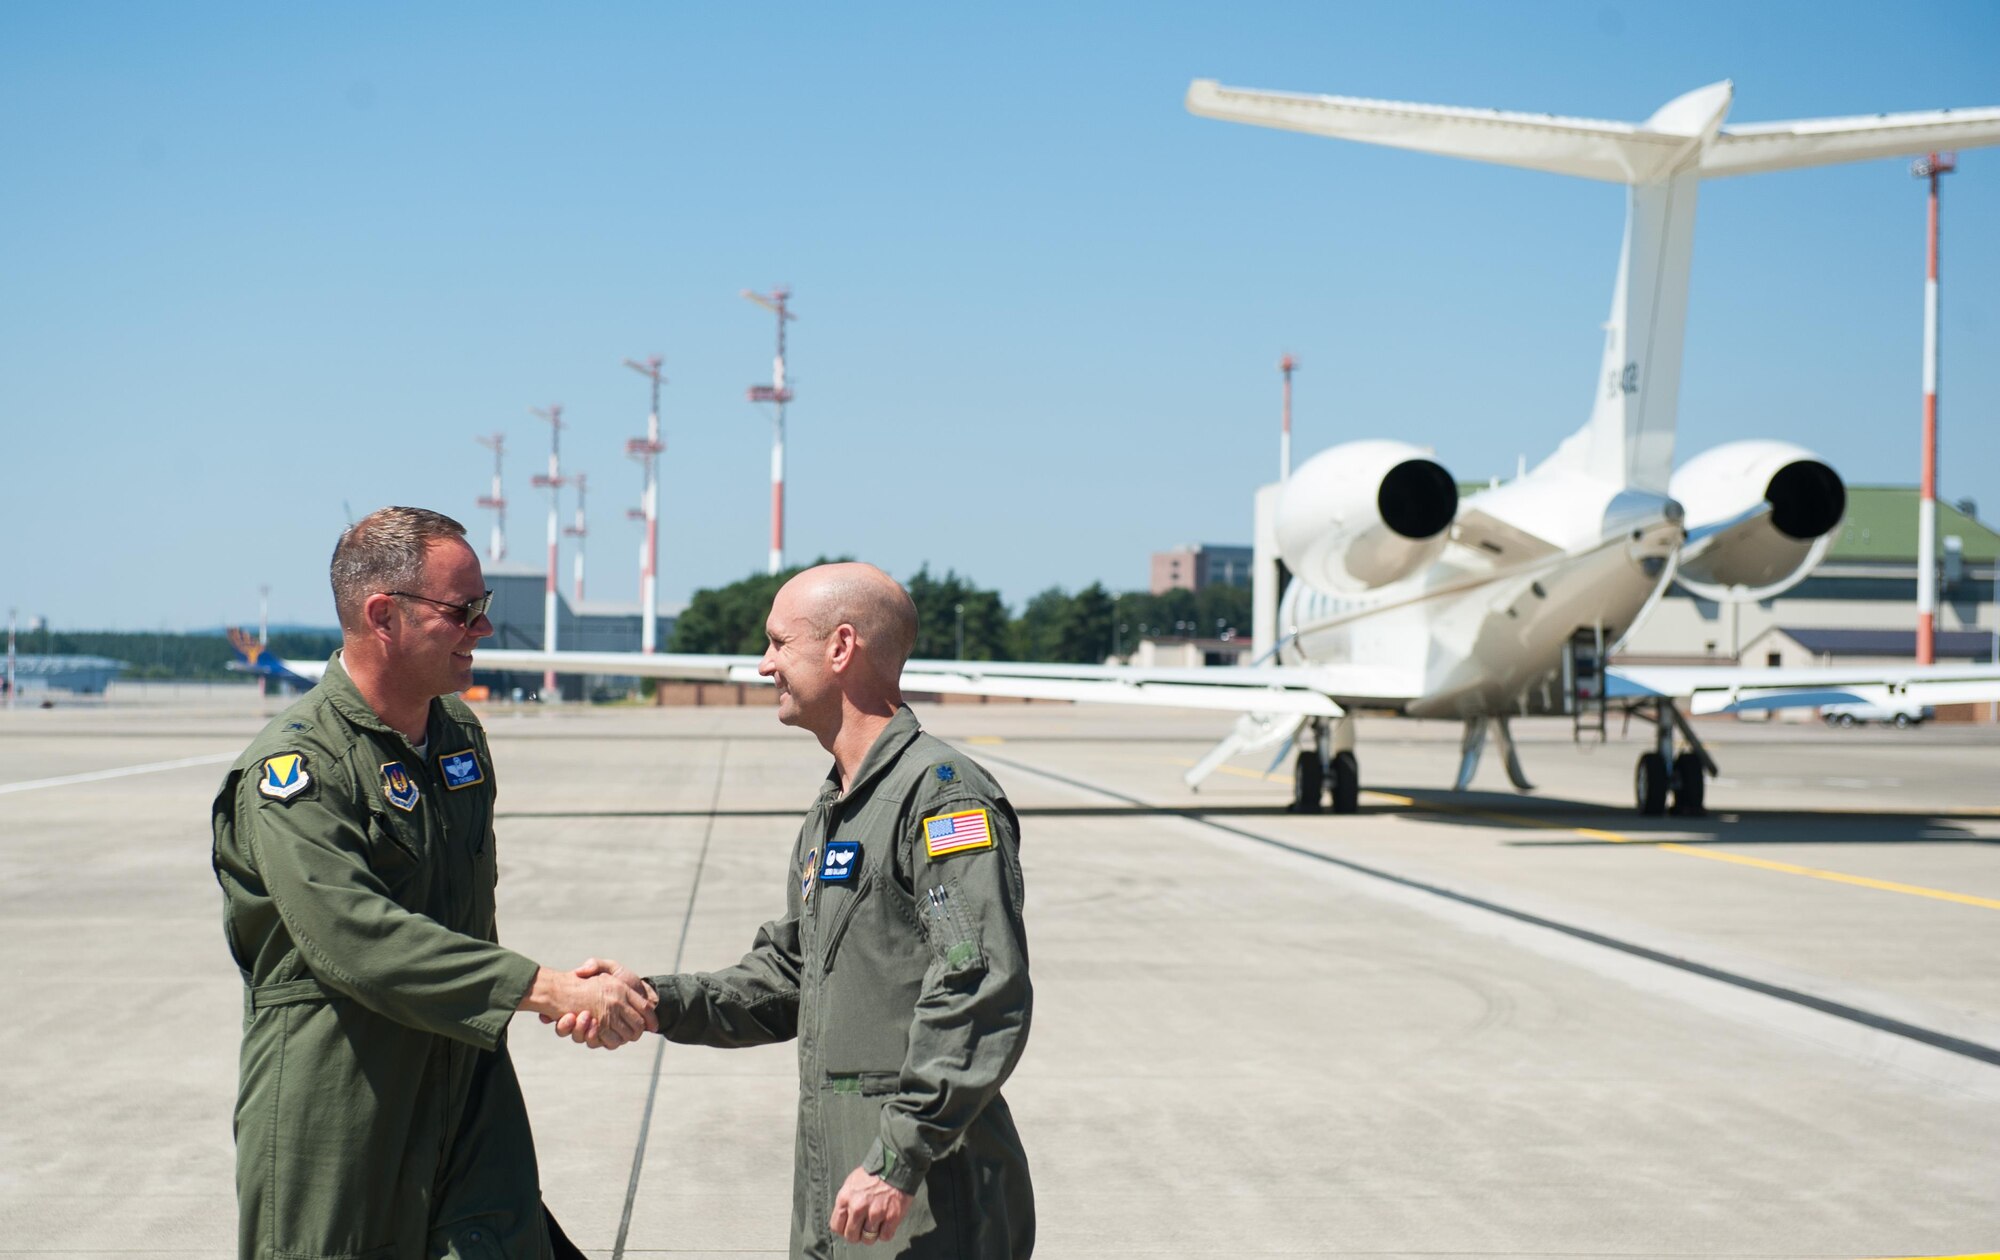 Brig. Gen. Jon T. Thomas, 86th Airlift Wing commander, greets Lt. Col. Derek Gallagher, 76th Airlift Squadron commander, before taking off for his final flight as the 86th AW commander July 19, 2016, at Ramstein Air Base, Germany. Thomas has served in the 86th AW for one year and will be moving on to Scott Air Force Base, Illinois. (U.S. Air force photo/Airman 1st Class Lane T. Plummer)